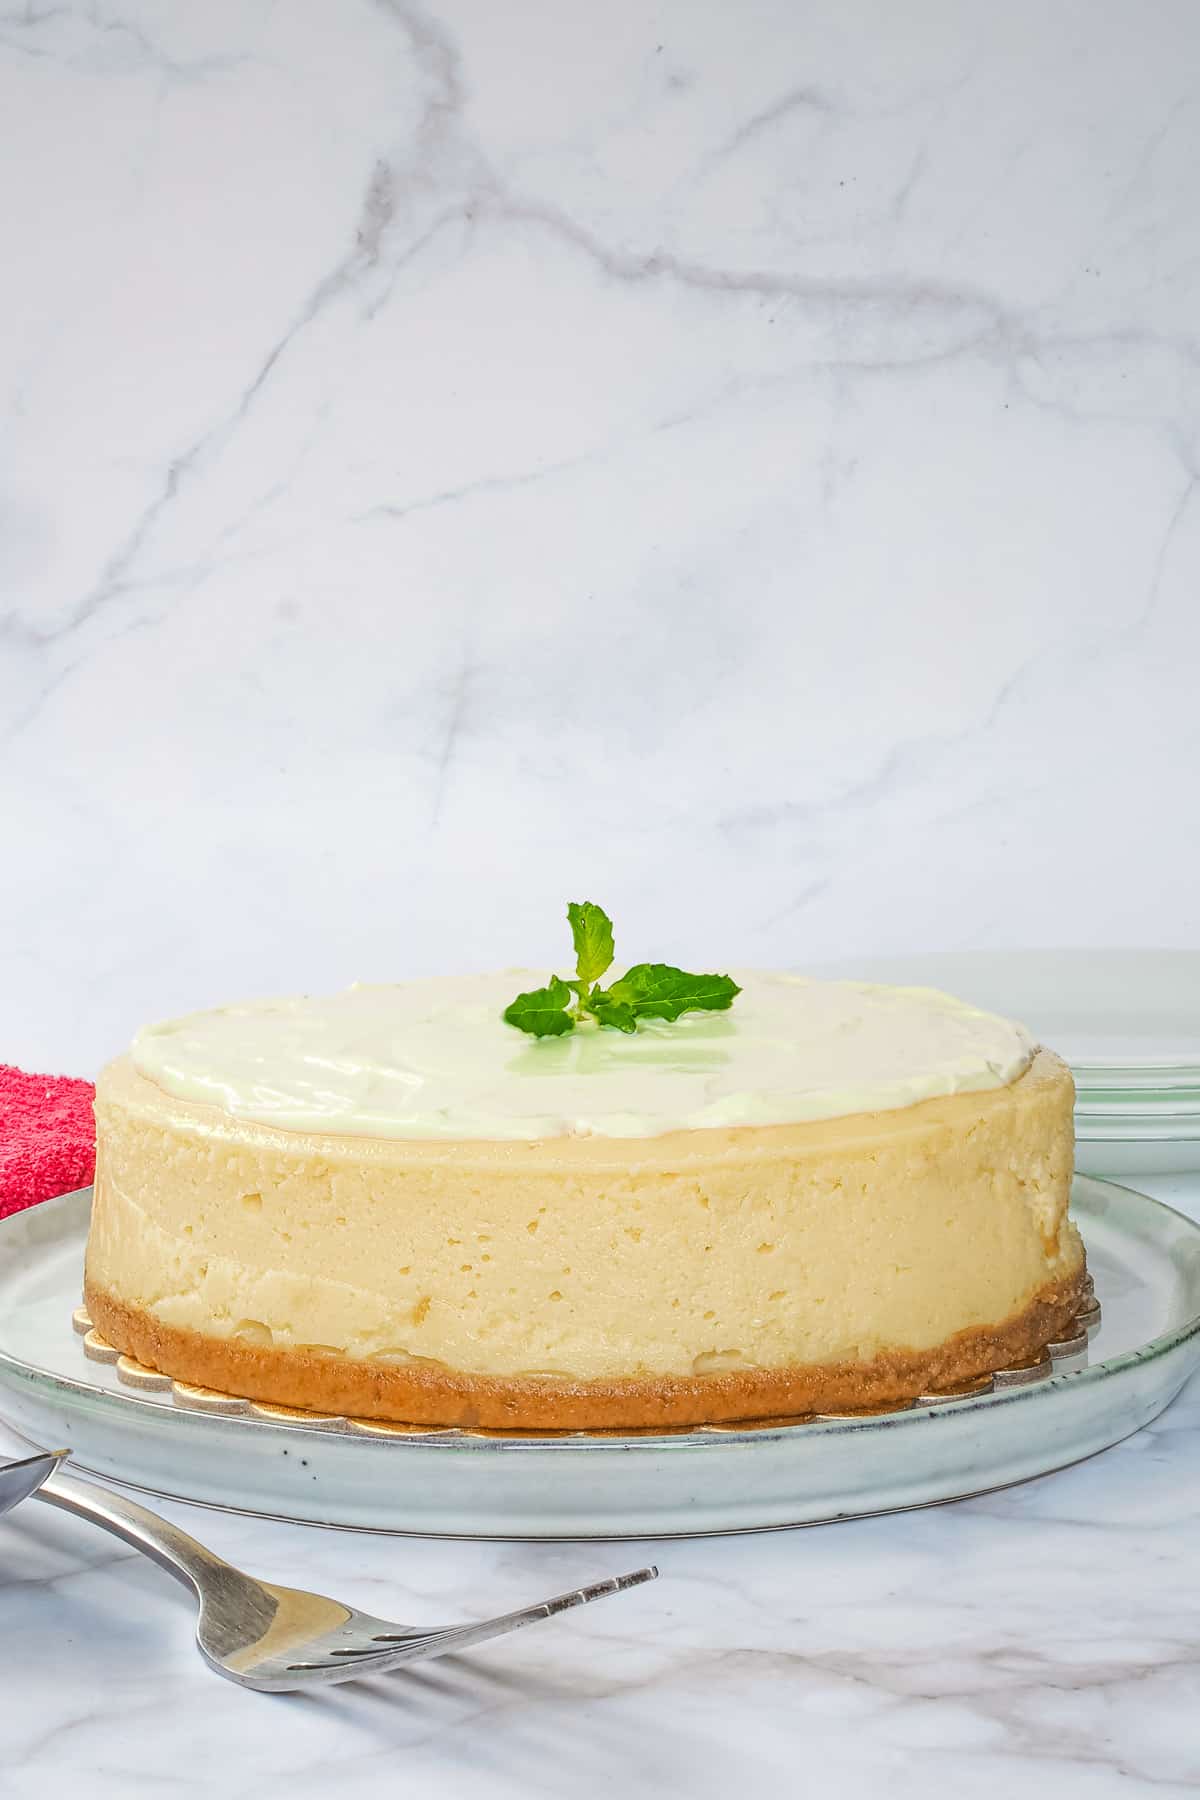 A round classic New York cheesecake with sour cream topping.